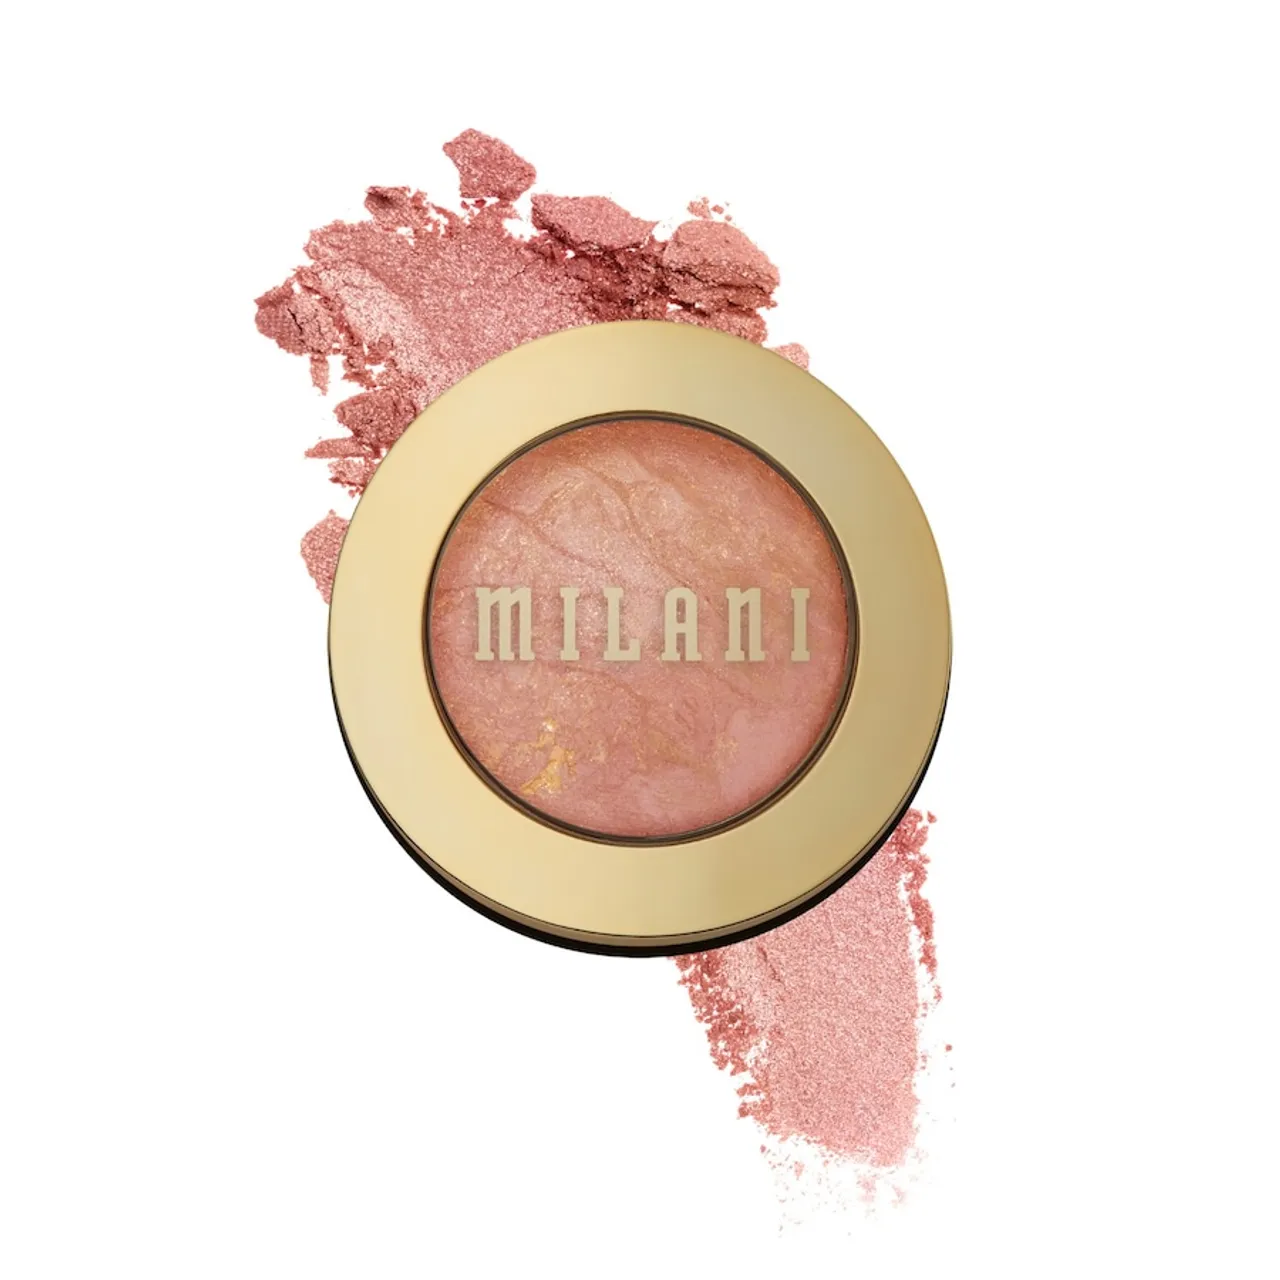 Milani - Baked Blush 3.5 g Nr. 03 - Berry Amore